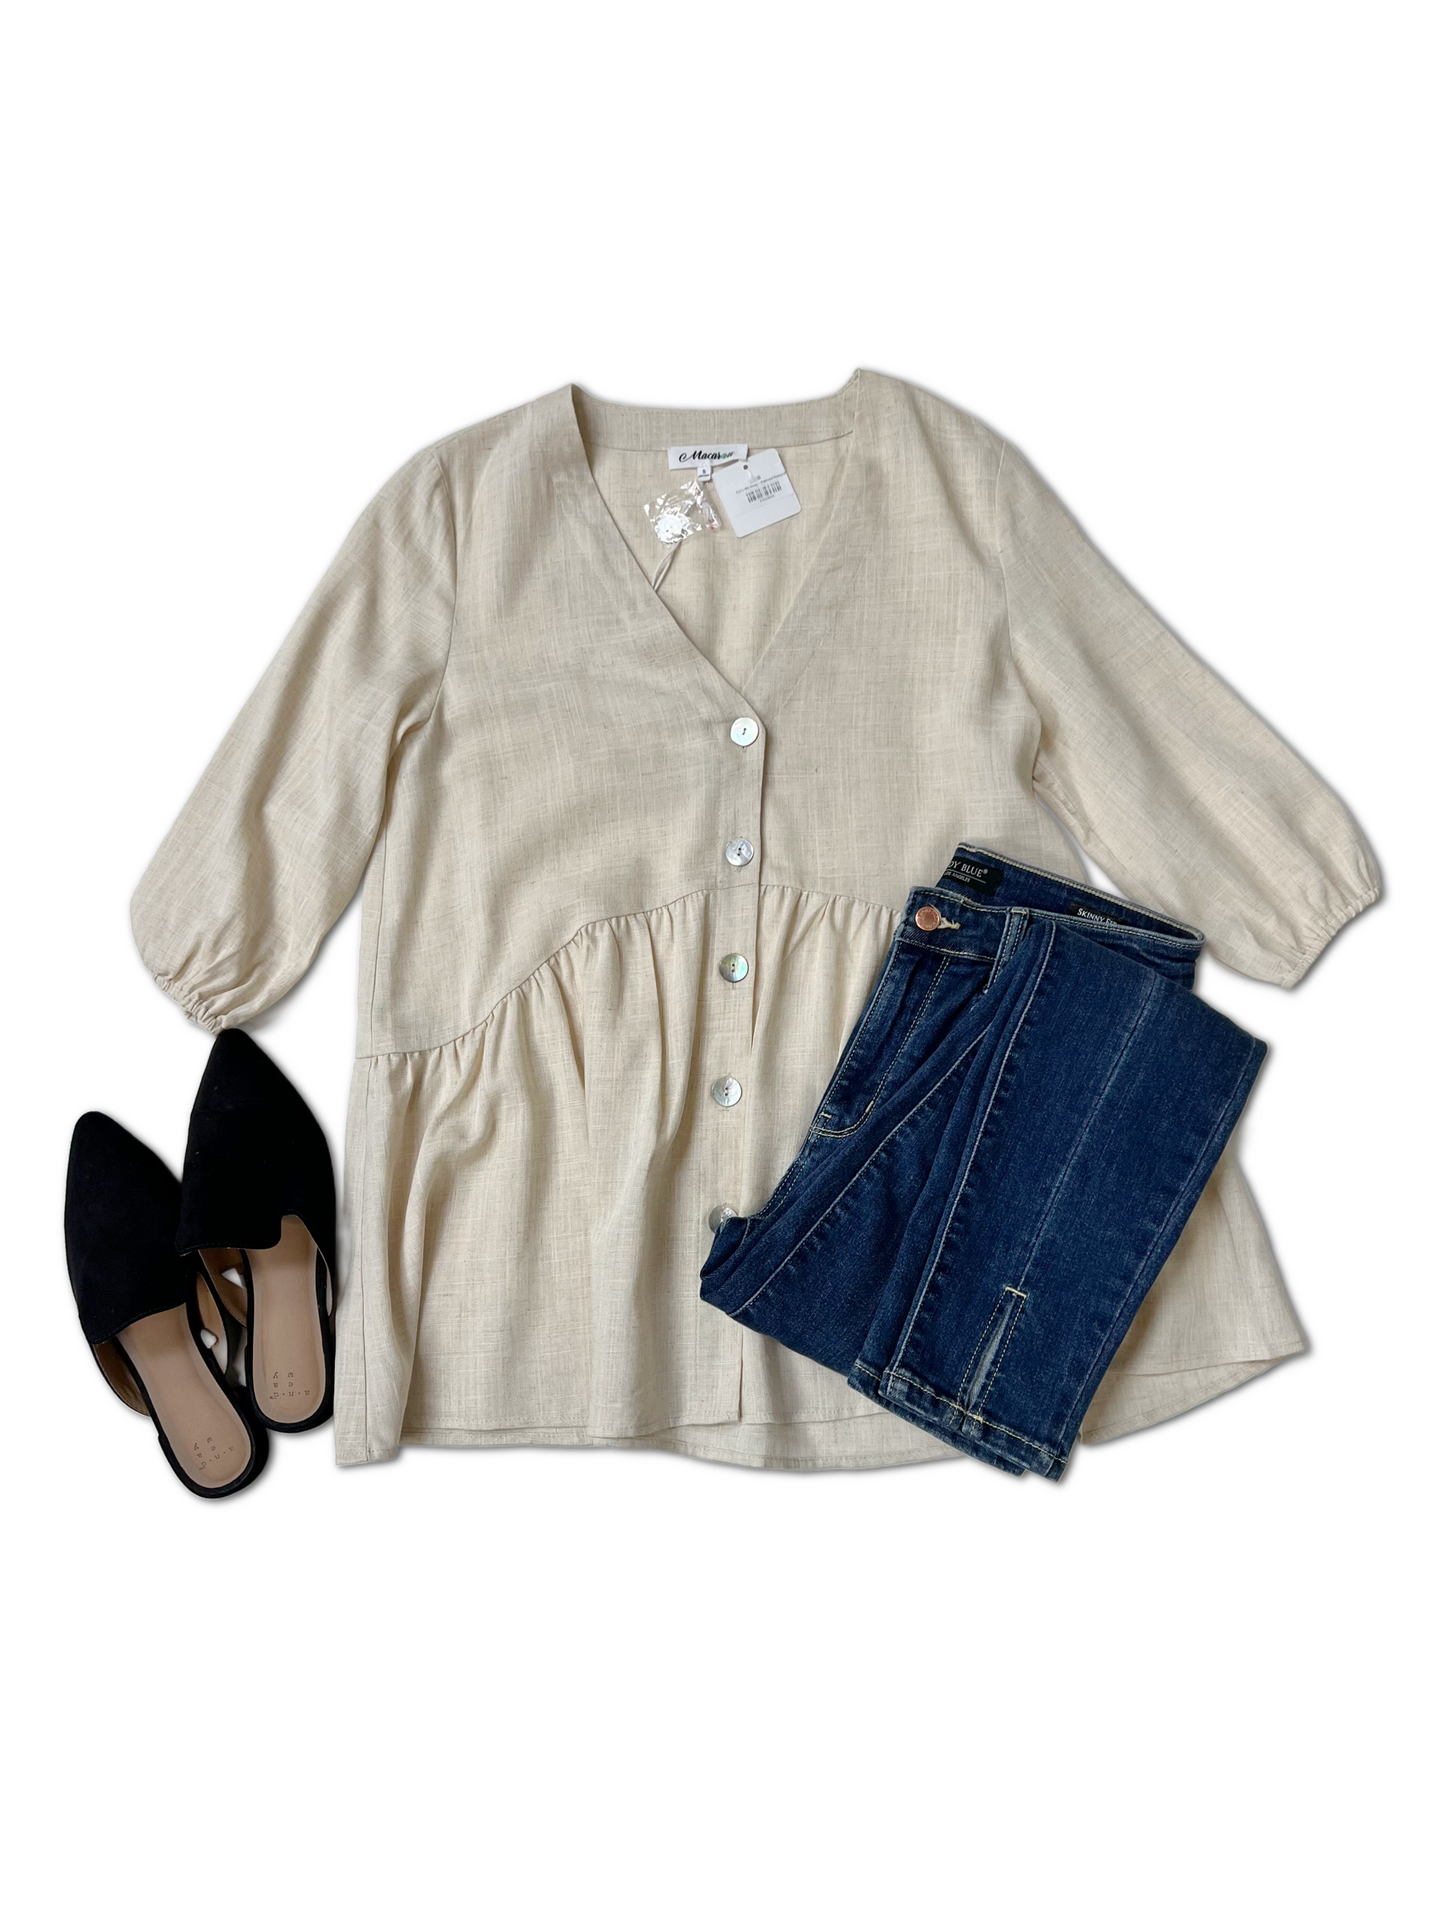 (Preorder) Carry Me Away Babydoll Blouse, Oatmeal (S-L)